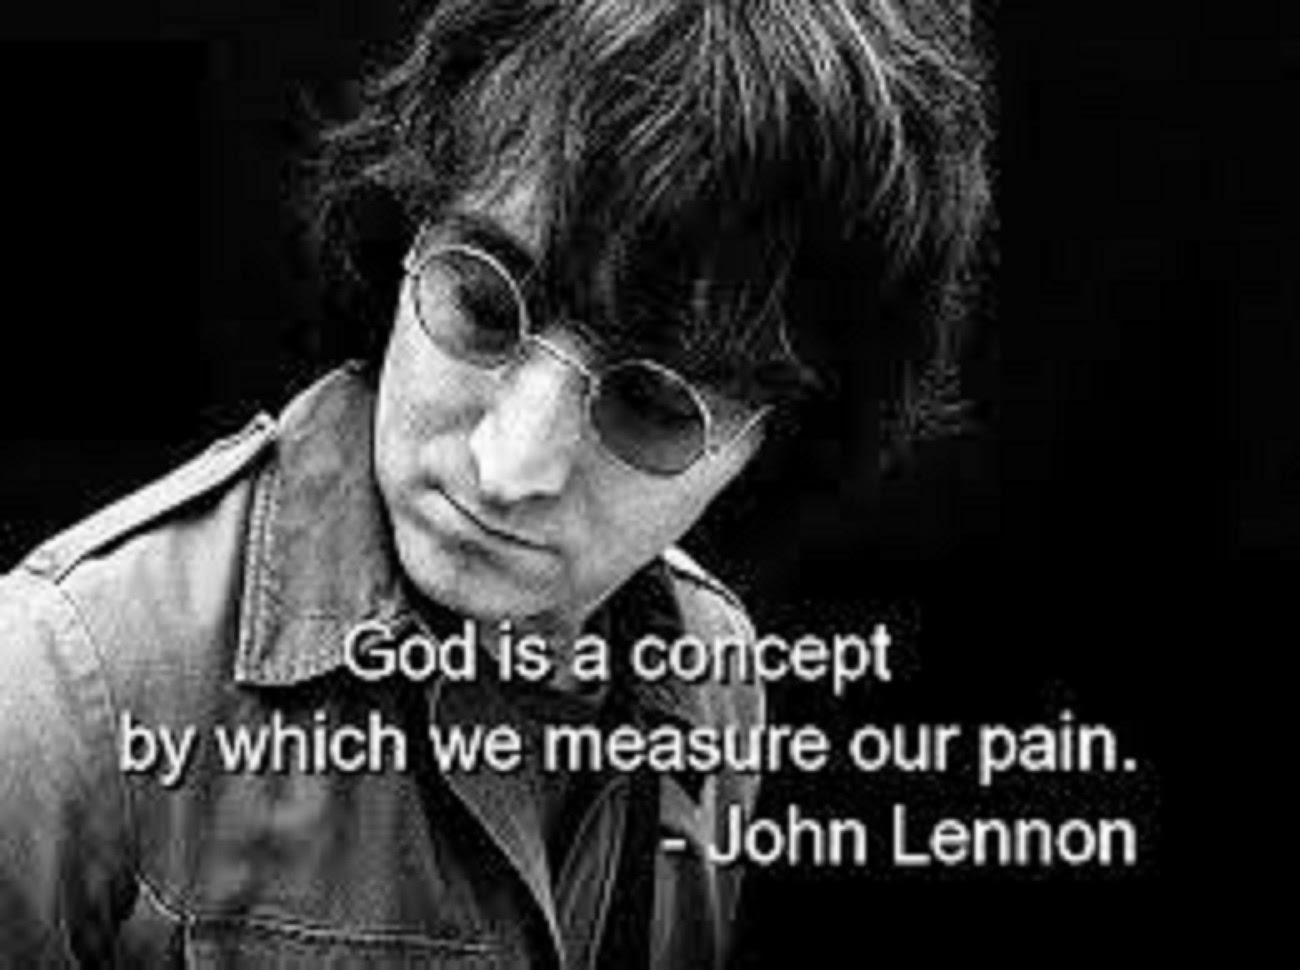 GOD IS A CONCEPT BY WHICH WE MEASURE OUR PAIN